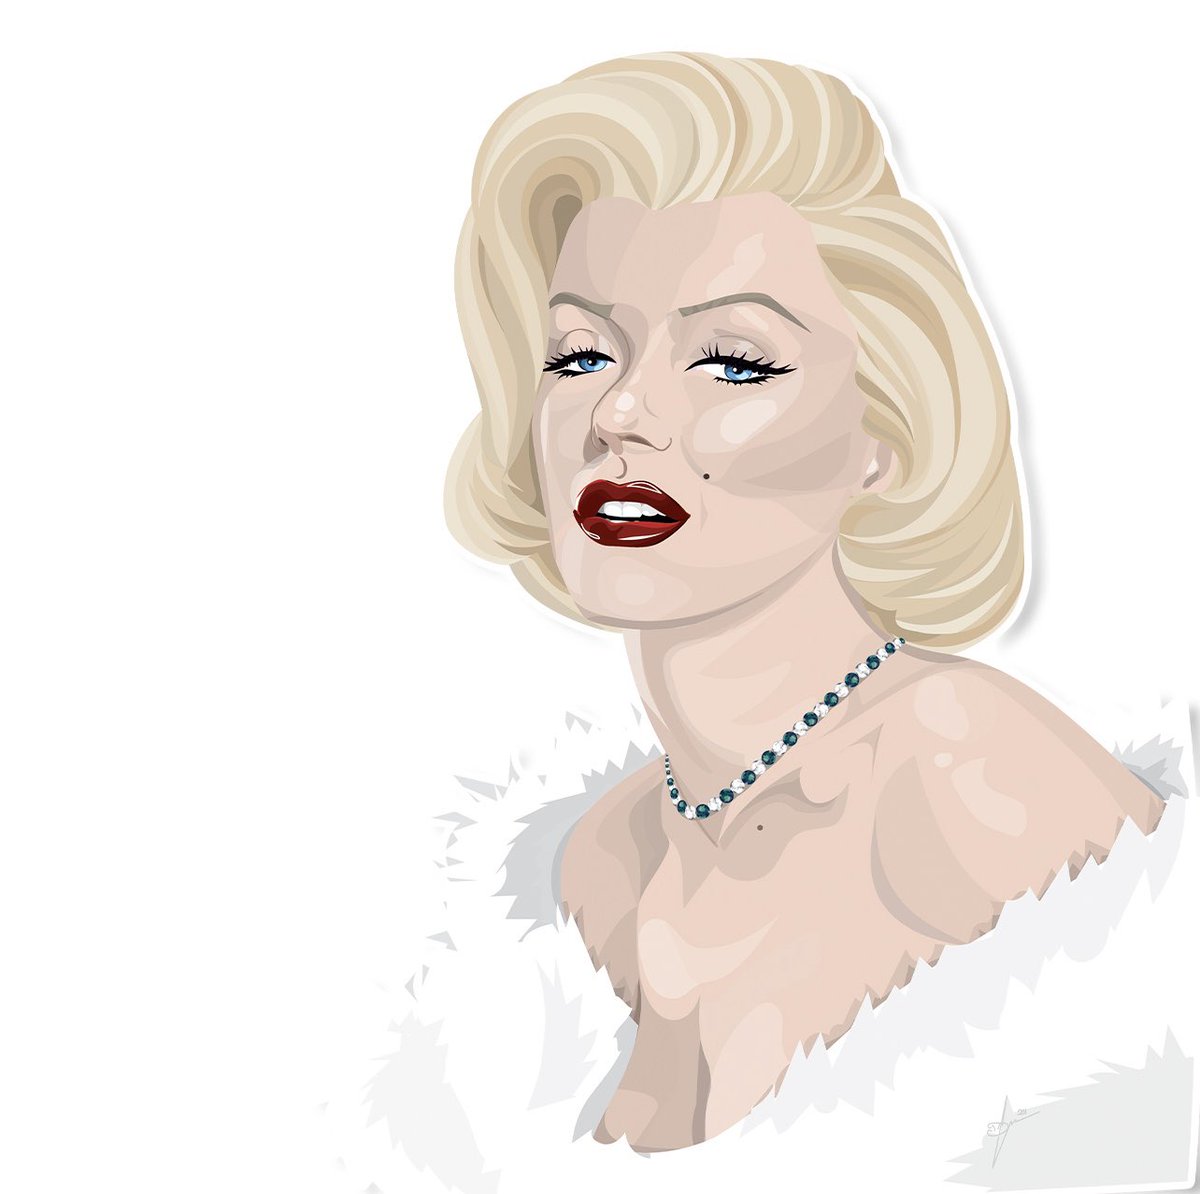 𝑀𝒶𝓇𝒾𝓁𝓎𝓃 𝑀𝑜𝓃𝓇𝑜𝑒💋

Which is your favorite?

•

#marilyn #marilynmonroe #marilynmonroefans #marilynmonroefan #marilynmonroe💋 #marilynmonroeart #marilynmonroeart #adobeillustrator #ilustrations #illustrationartists